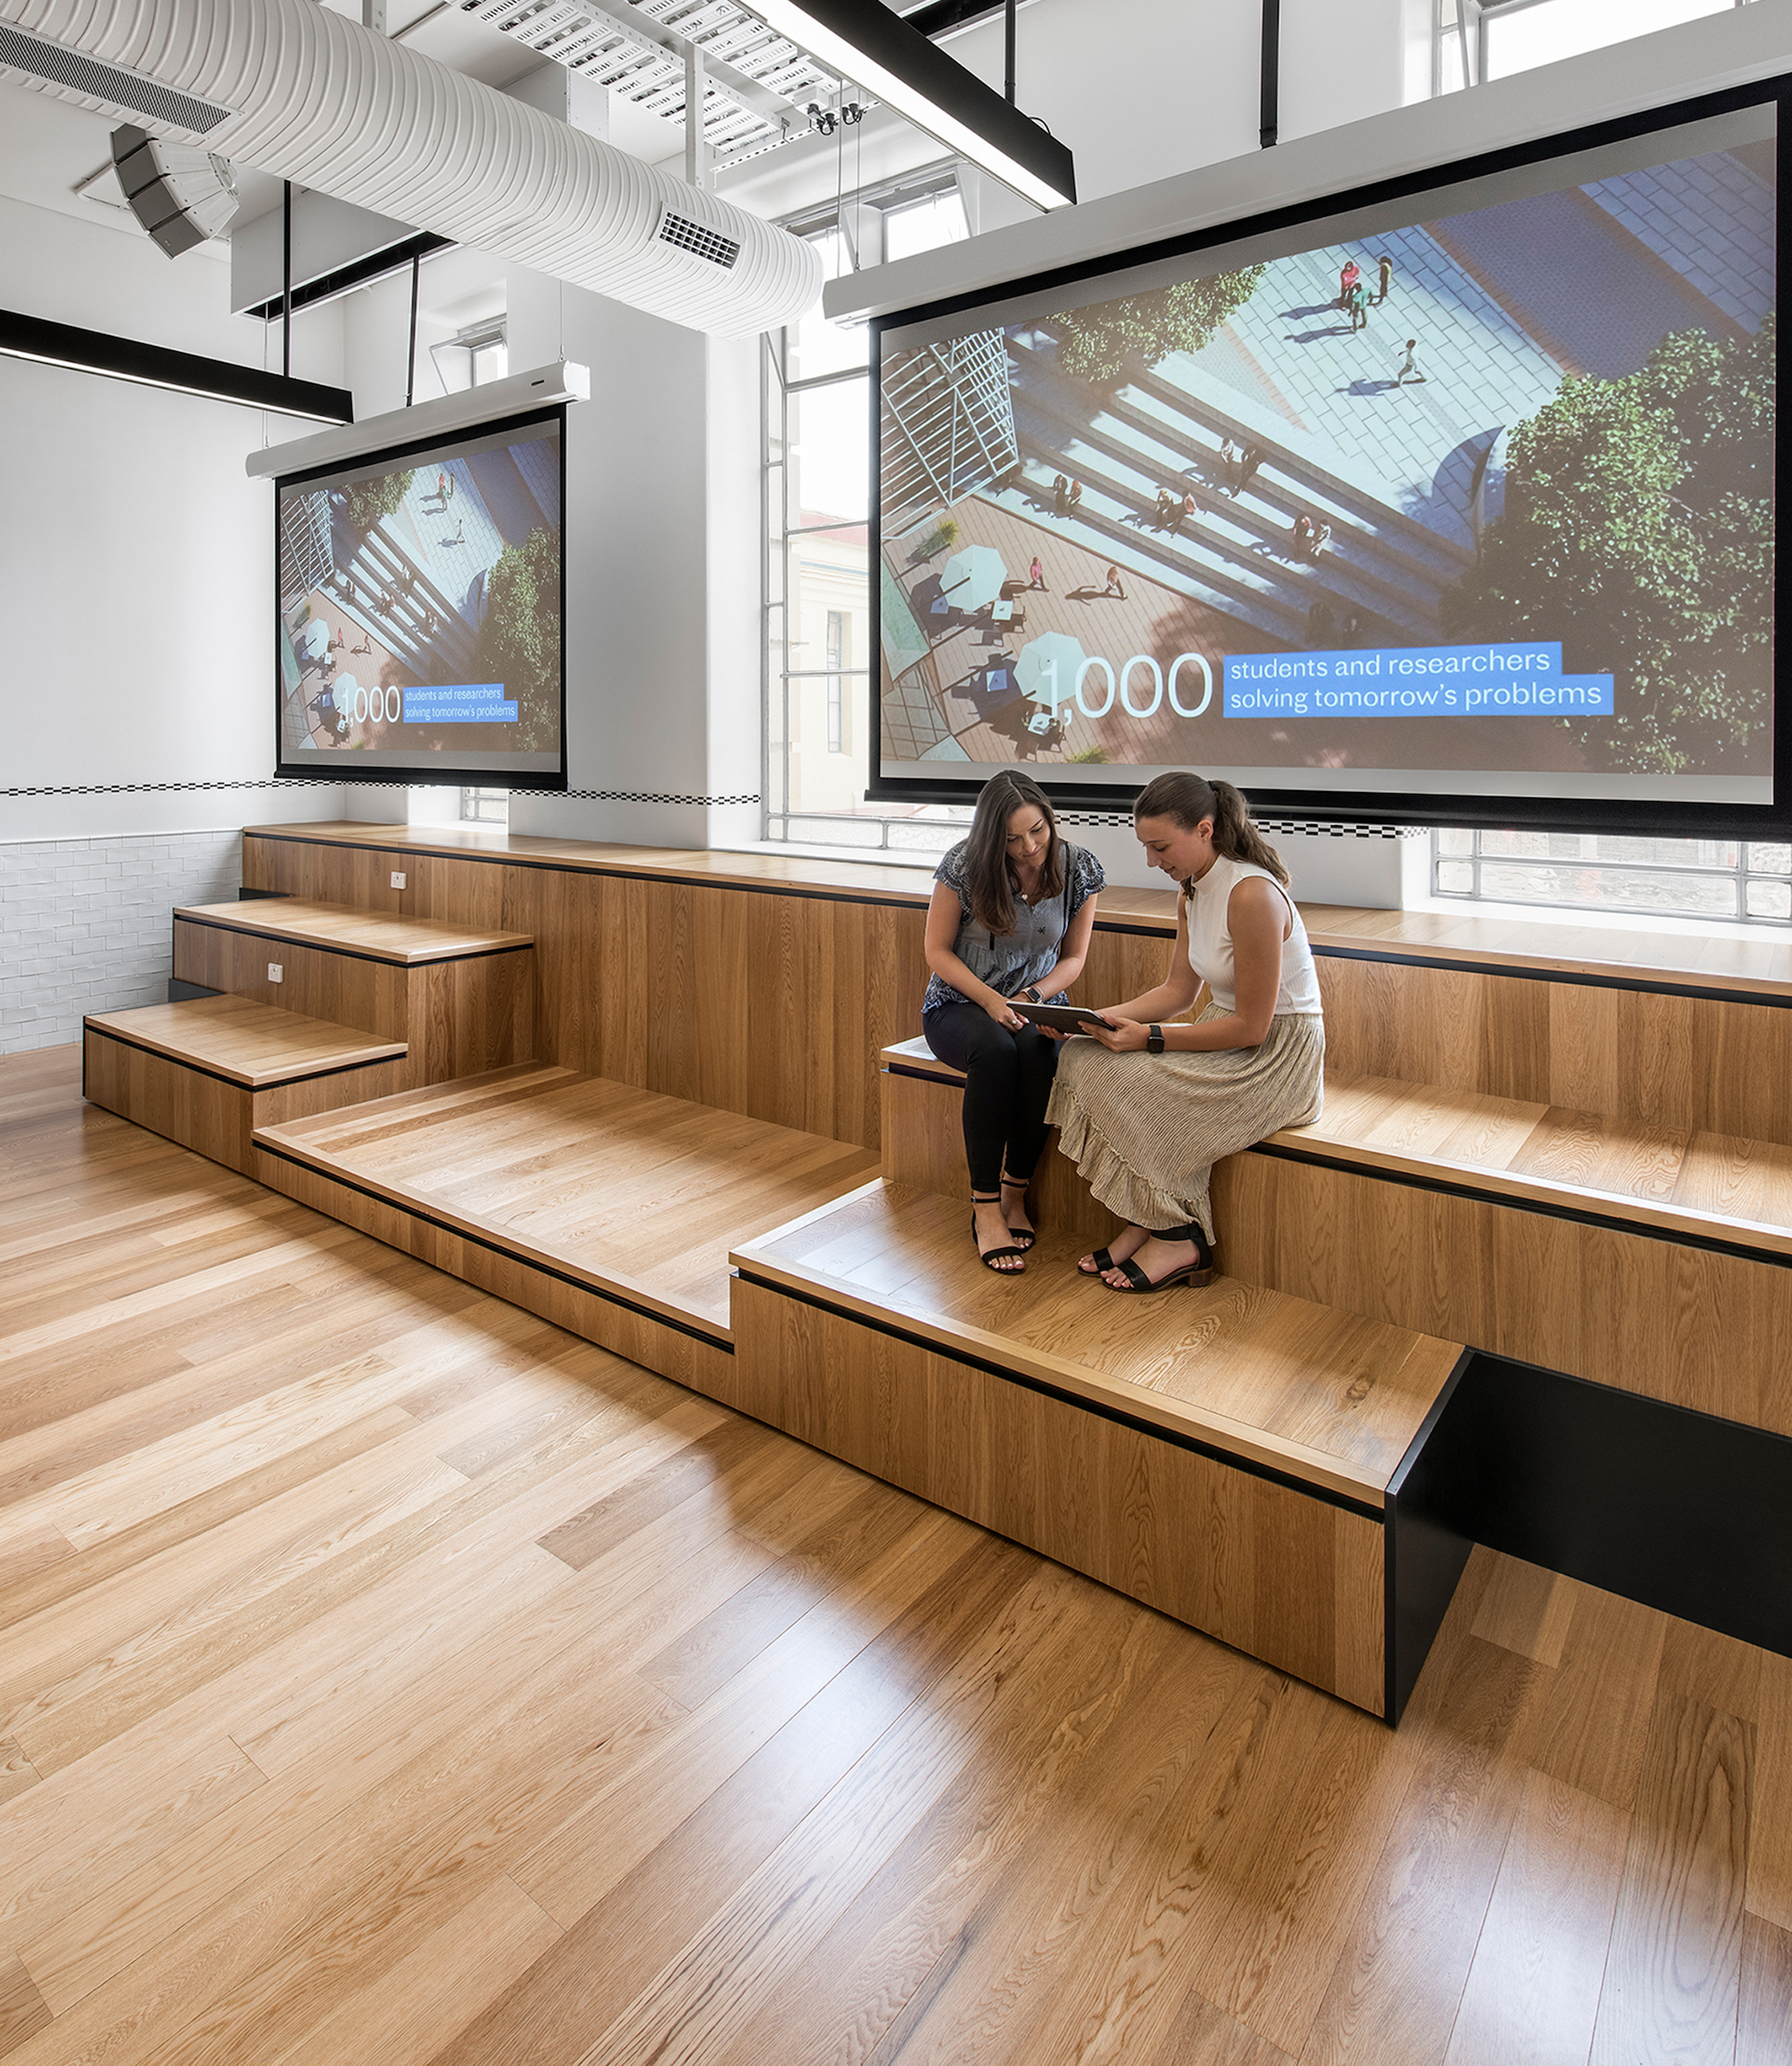 Two people sitting on a wooden bench, two projector screens are behind them